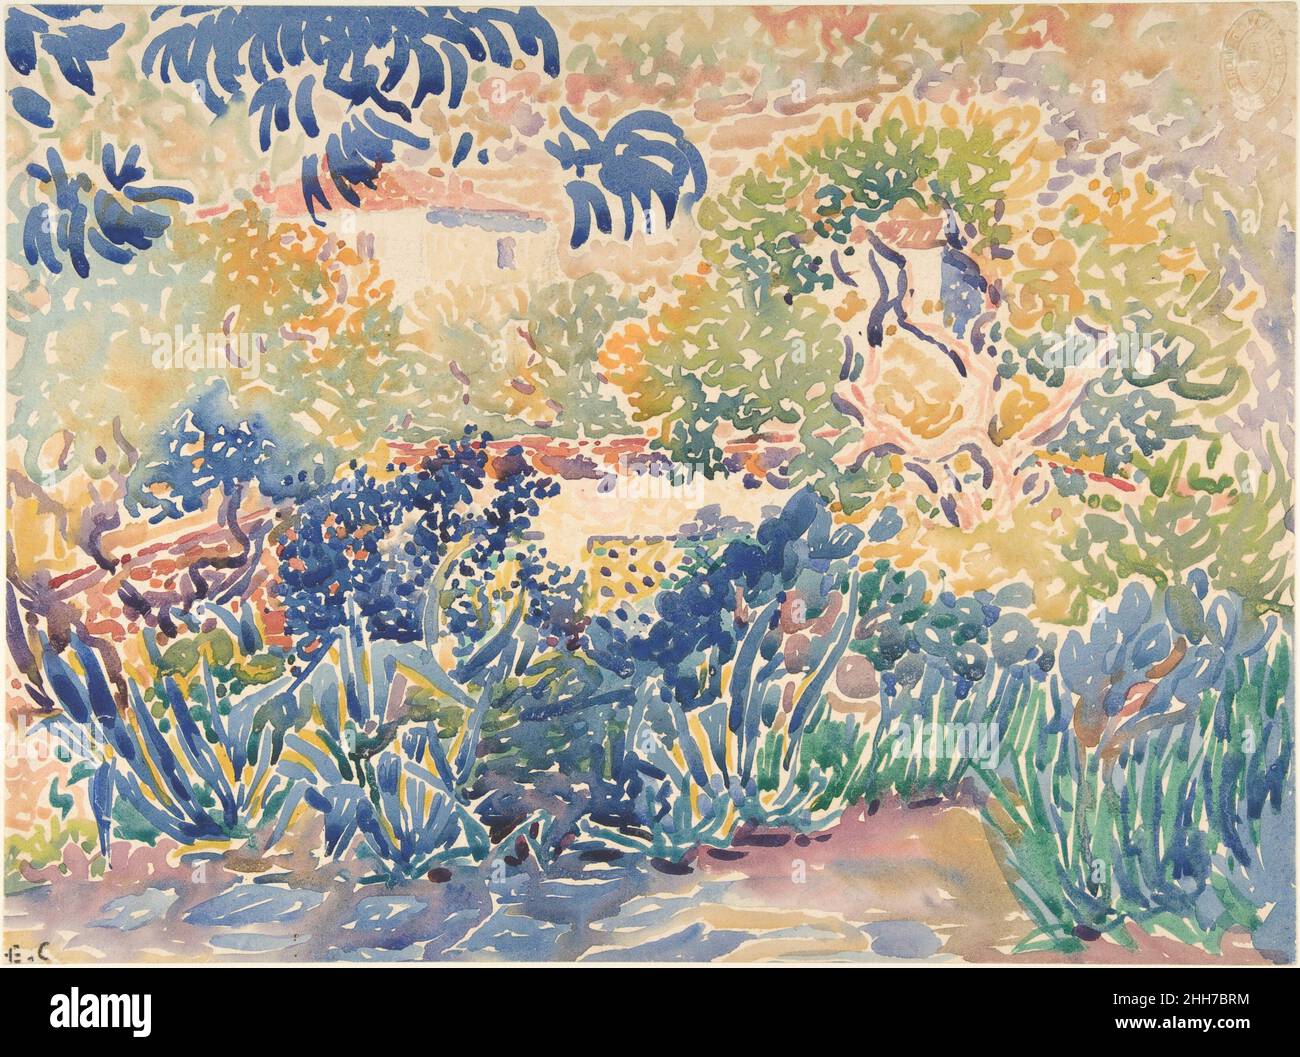 The Artist's Garden at Saint-Clair 1904–5 Henri-Edmond Cross (Henri-Edmond Delacroix) French The art of Henri-Edmond Cross belongs to the later years of Neo-Impressionism. It was not until he moved to Saint-Clair, a small hamlet on the Côte d'Azur near Saint-Tropez, that he turned to pure landscape painting in oil and watercolor, using a vivid palette of saturated colors. On the Mediterranean coast, Cross relaxed the rigorous optical arrangements of the Divisionist technique in favor of a style of painting using long, blocky brushmarks in decorative, mosaic-like patterns. Cross painted many ra Stock Photo